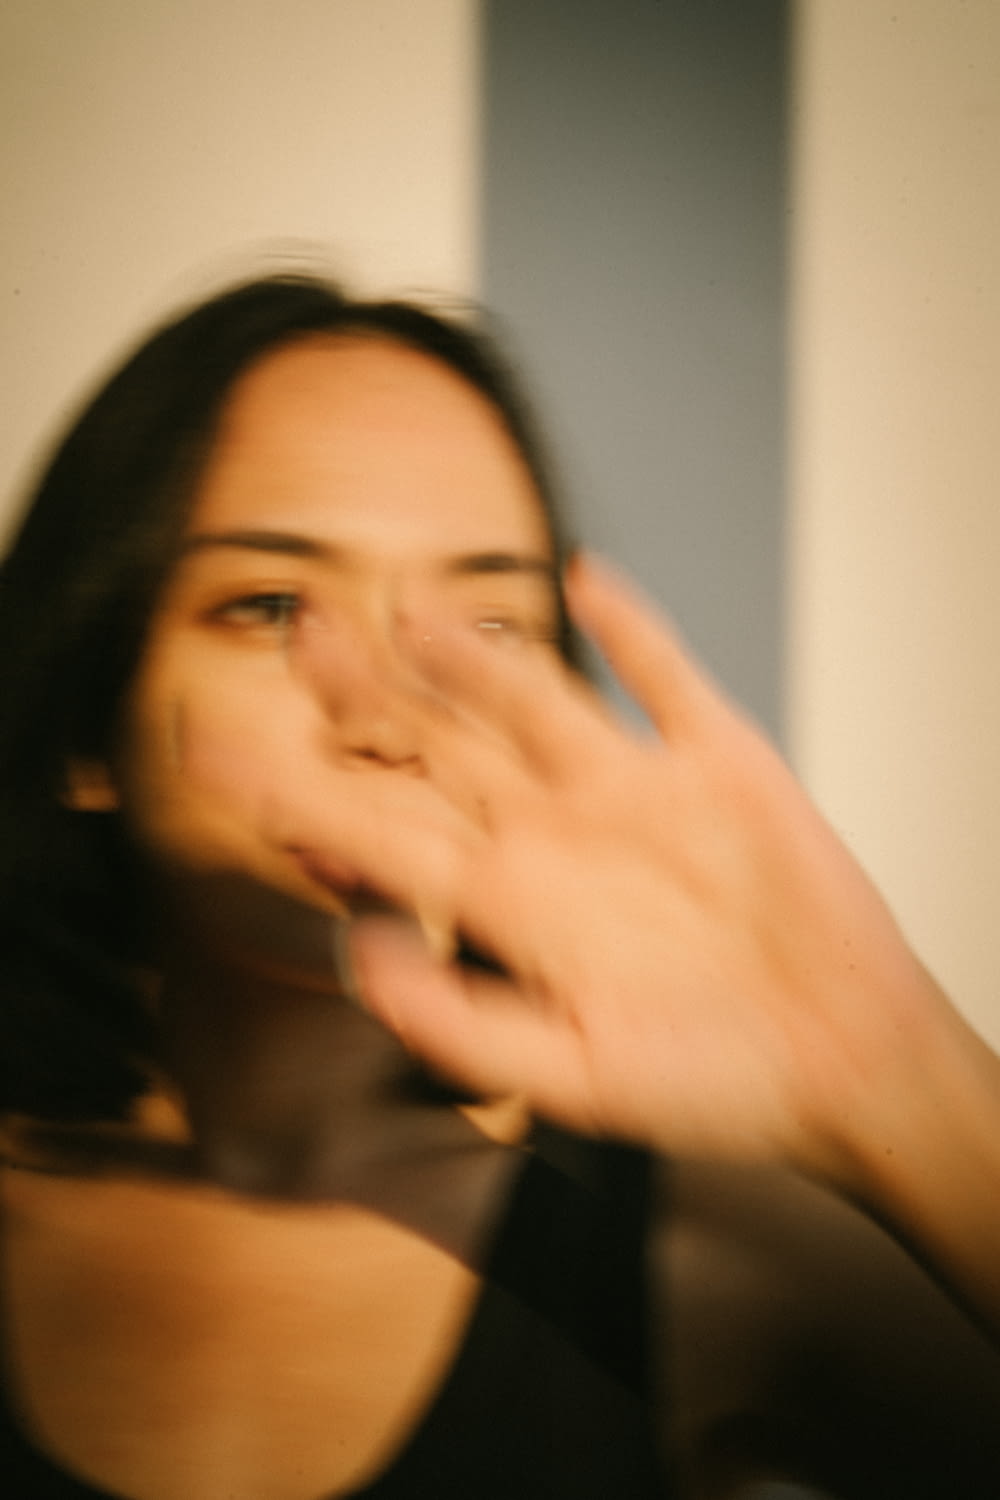 a blurry photo of a woman holding a cell phone